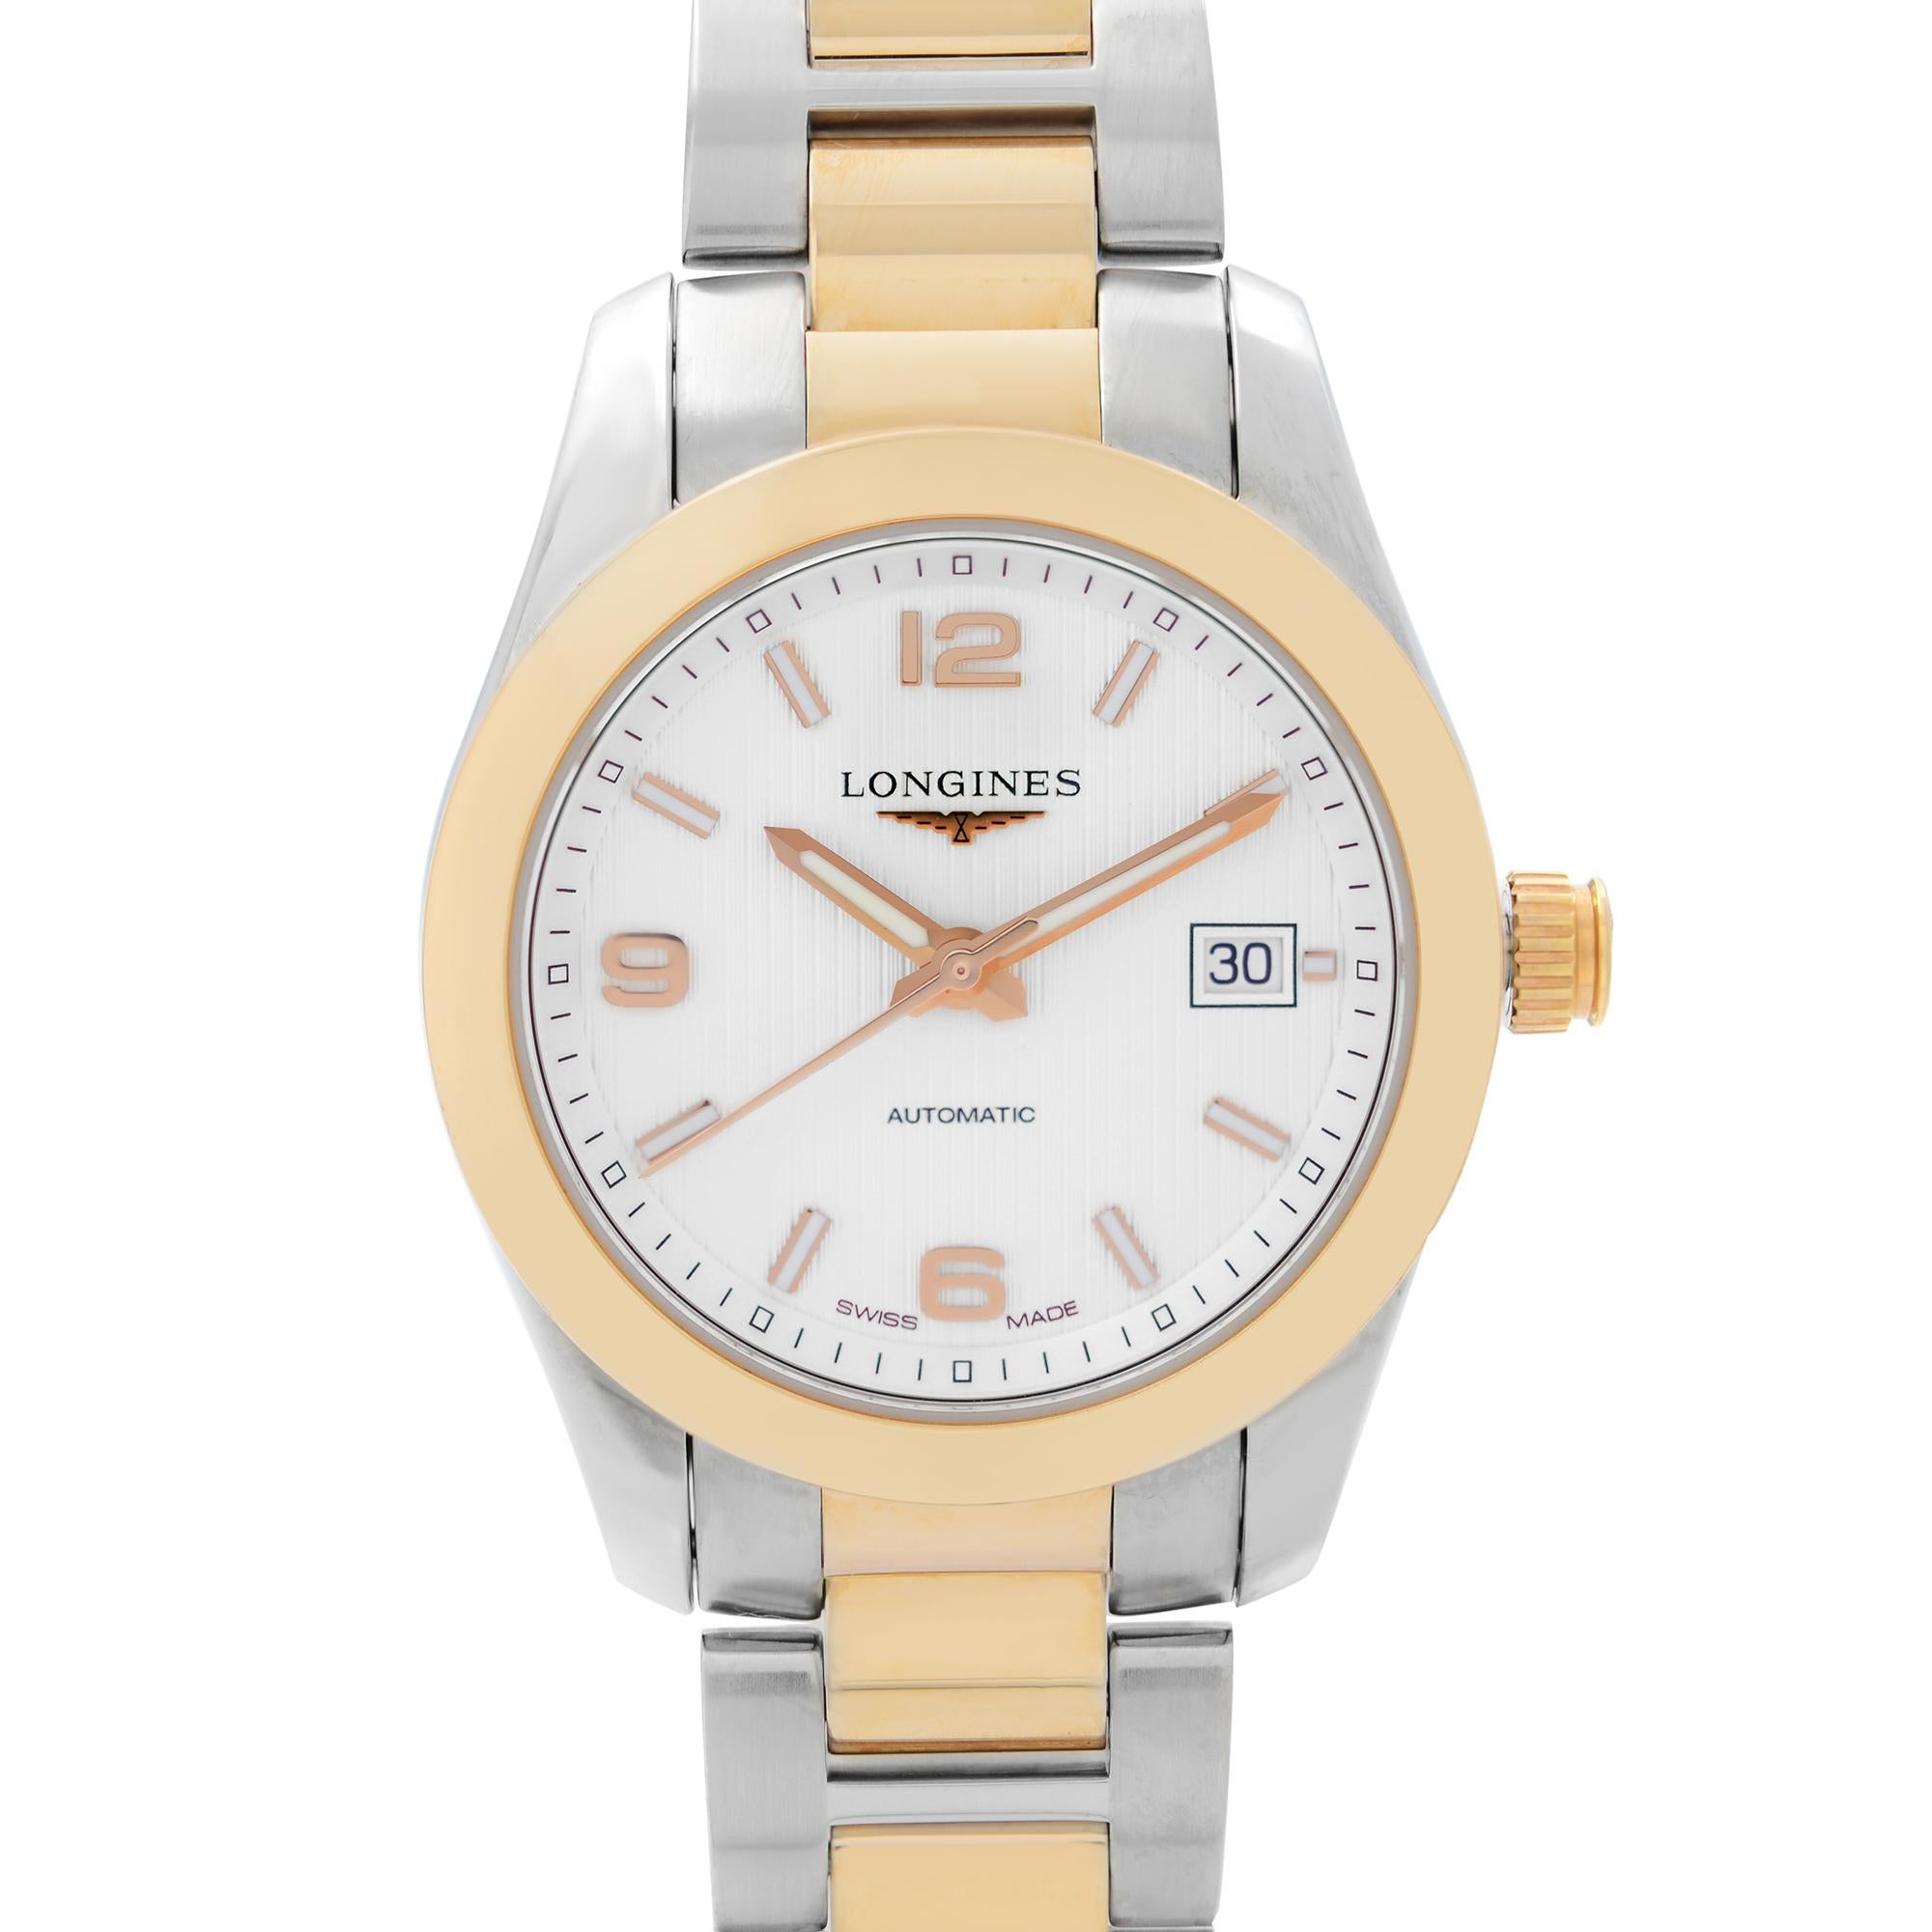 Display Model Longines Conquest Classic Steel Silver Dial Automatic Ladies Watch L2.285.5.76.7. This Beautiful Timepiece is Powered by Mechanical (Automatic) Movement and Features: Stainless Steel Case with a Stainless Steel & 18k Yellow Gold (cap